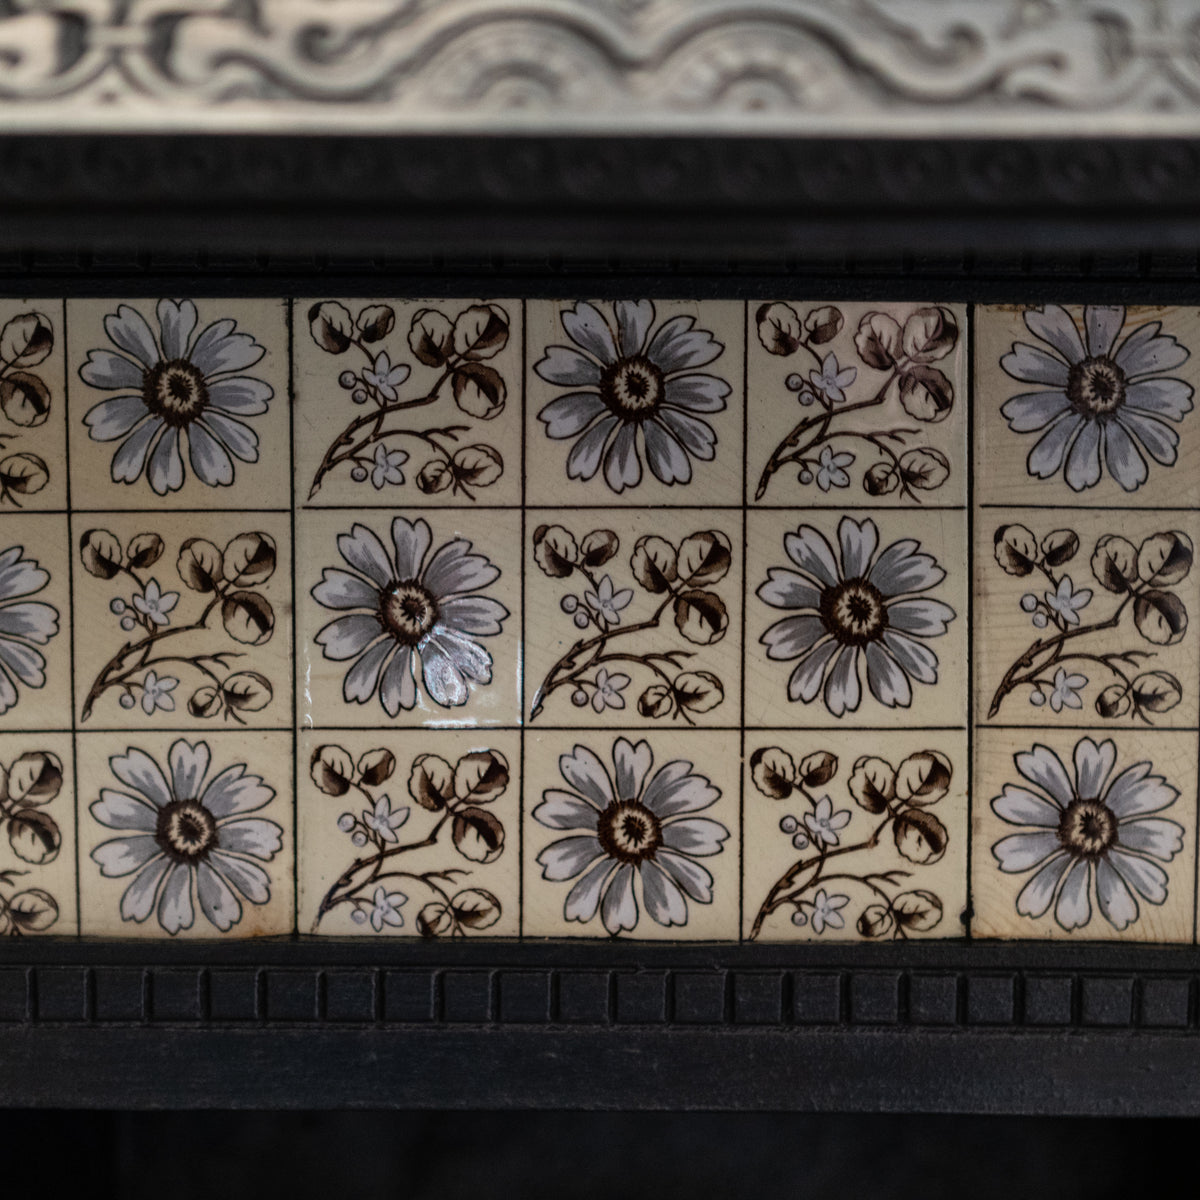 Antique Cast Iron Fireplace Insert With Pale Blue Floral Tiles | The Architectural Forum